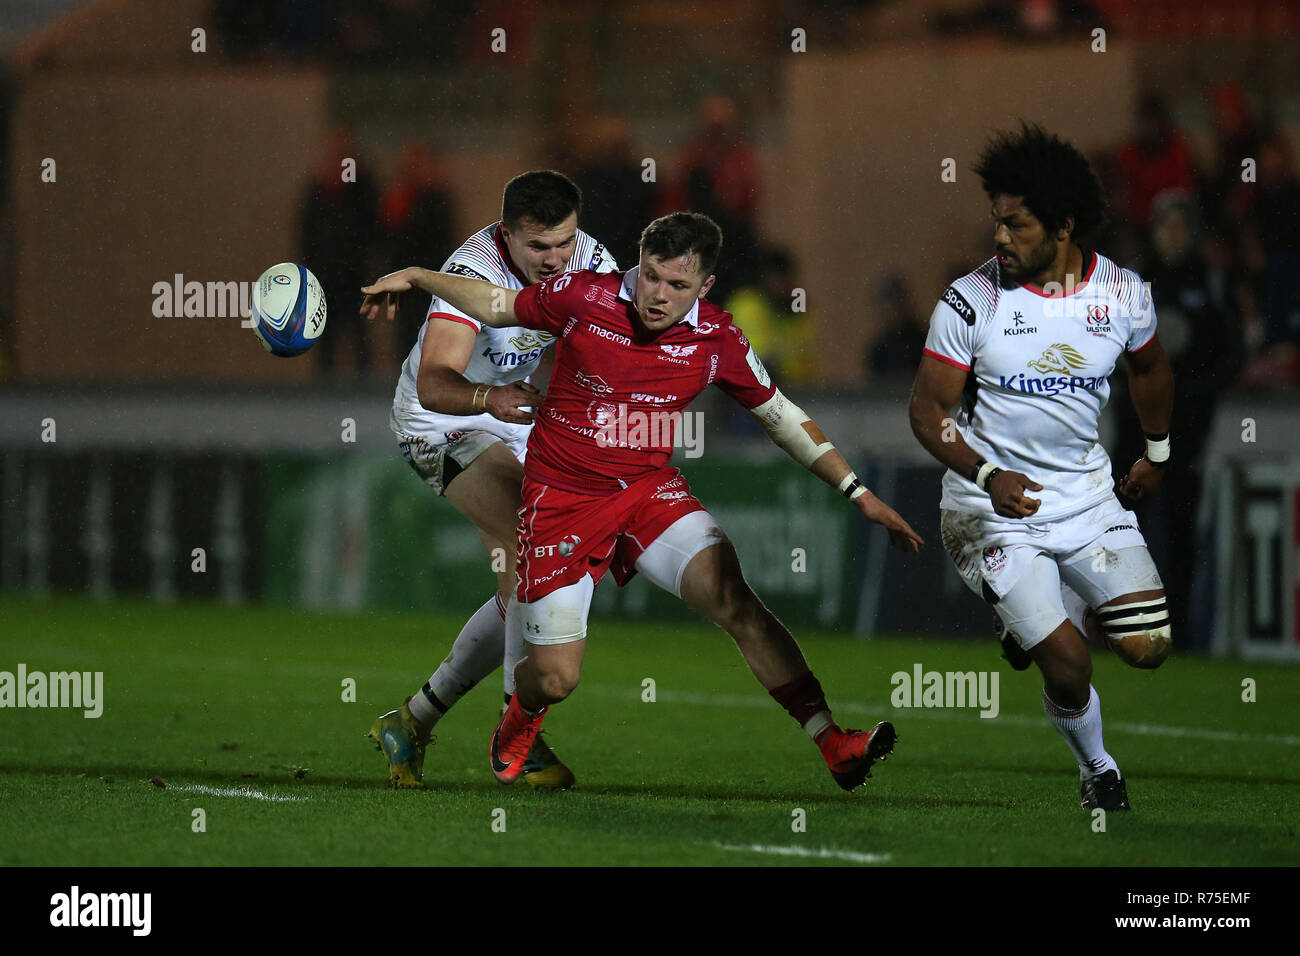 Llanelli, UK. 07th Dec, 2018. Steffan Evans of the Scarlets Credit: in action. Scarlets v Ulster rugby, Heineken European Champions Cup, pool 4 match at Parc y Scarlets in Llanelli, South Wales on Friday 7th December 2018. picture by Andrew Orchard/Andrew Orchard sports photography/Alamy Live News Stock Photo